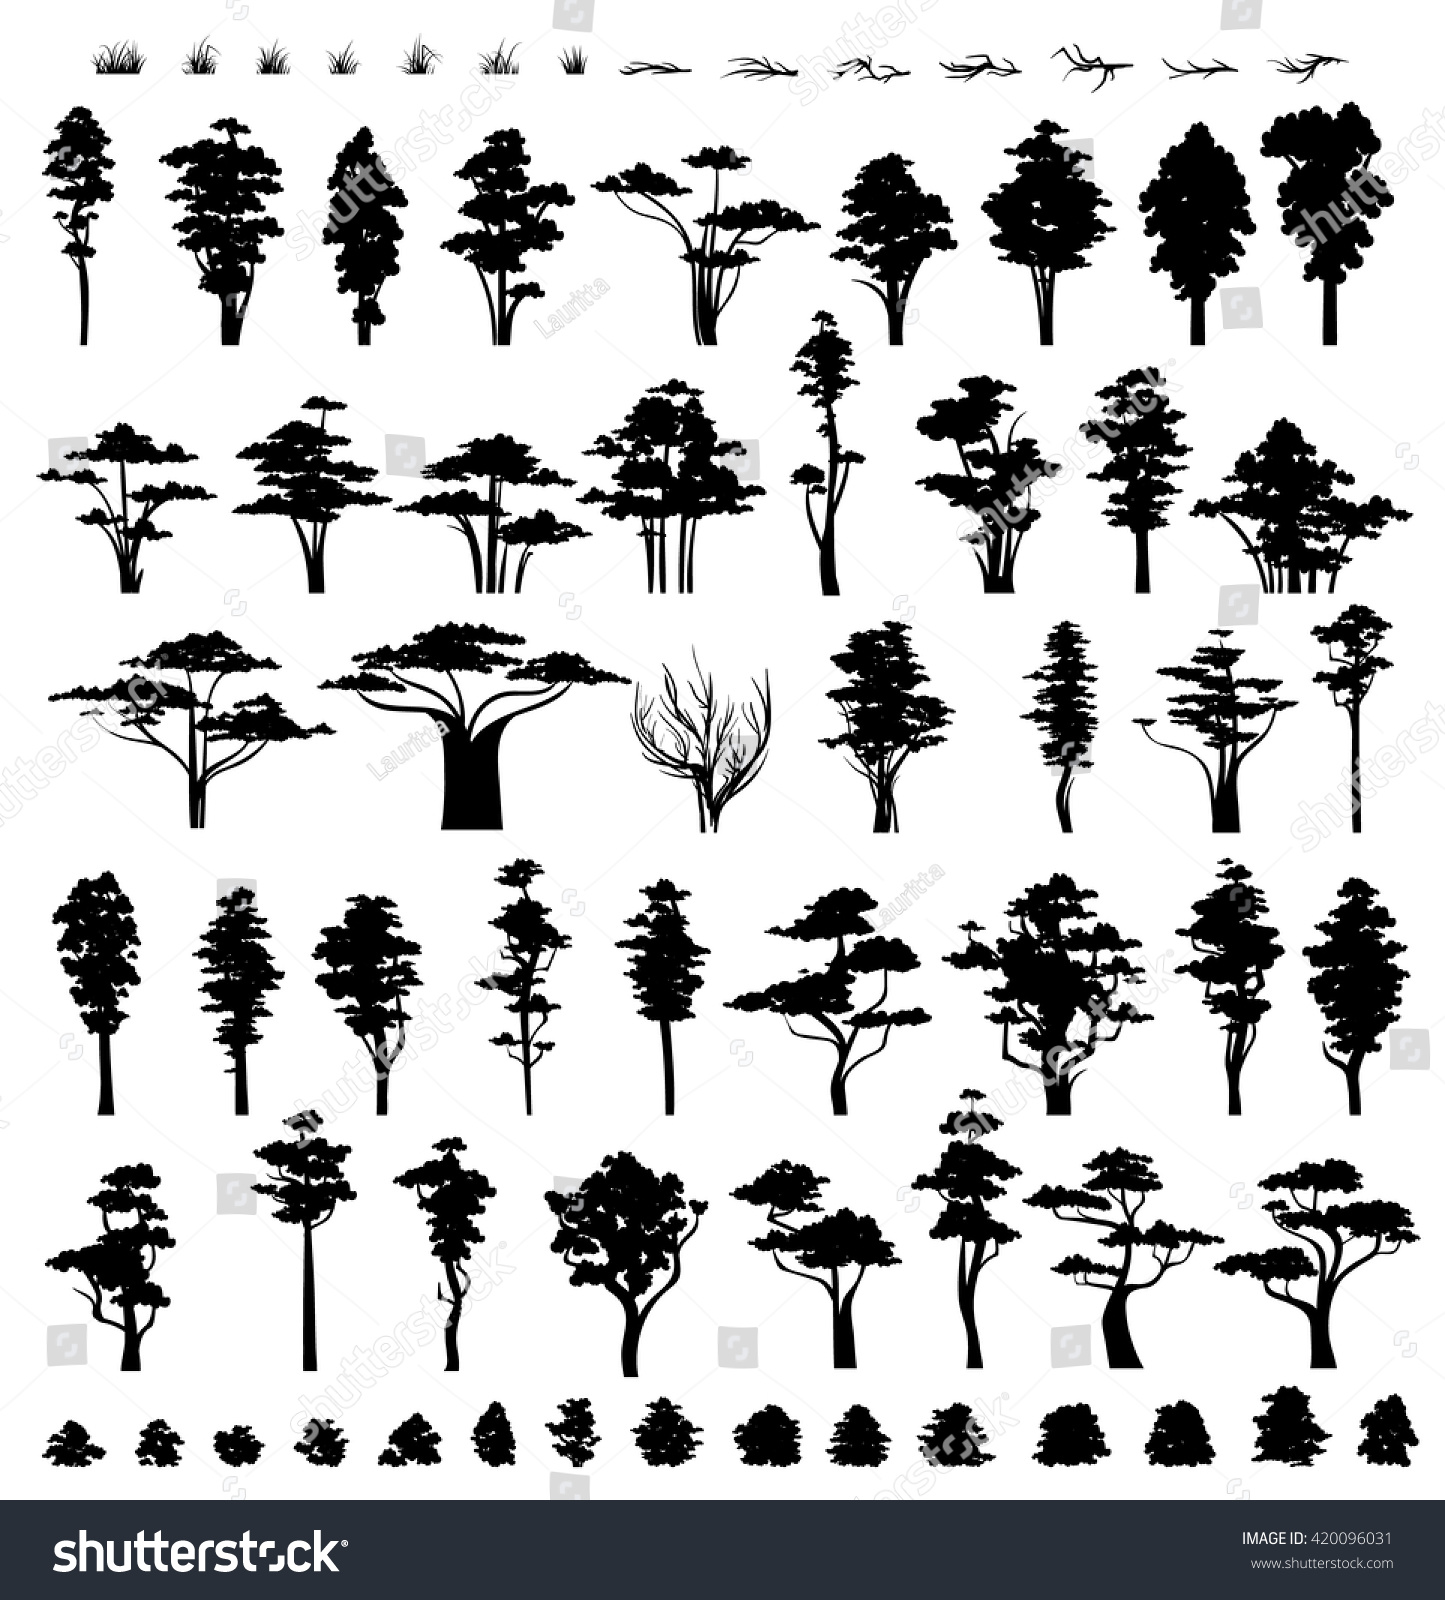 SVG of Forest trees collection silhouette vector.  Nature grass and bushes.  svg